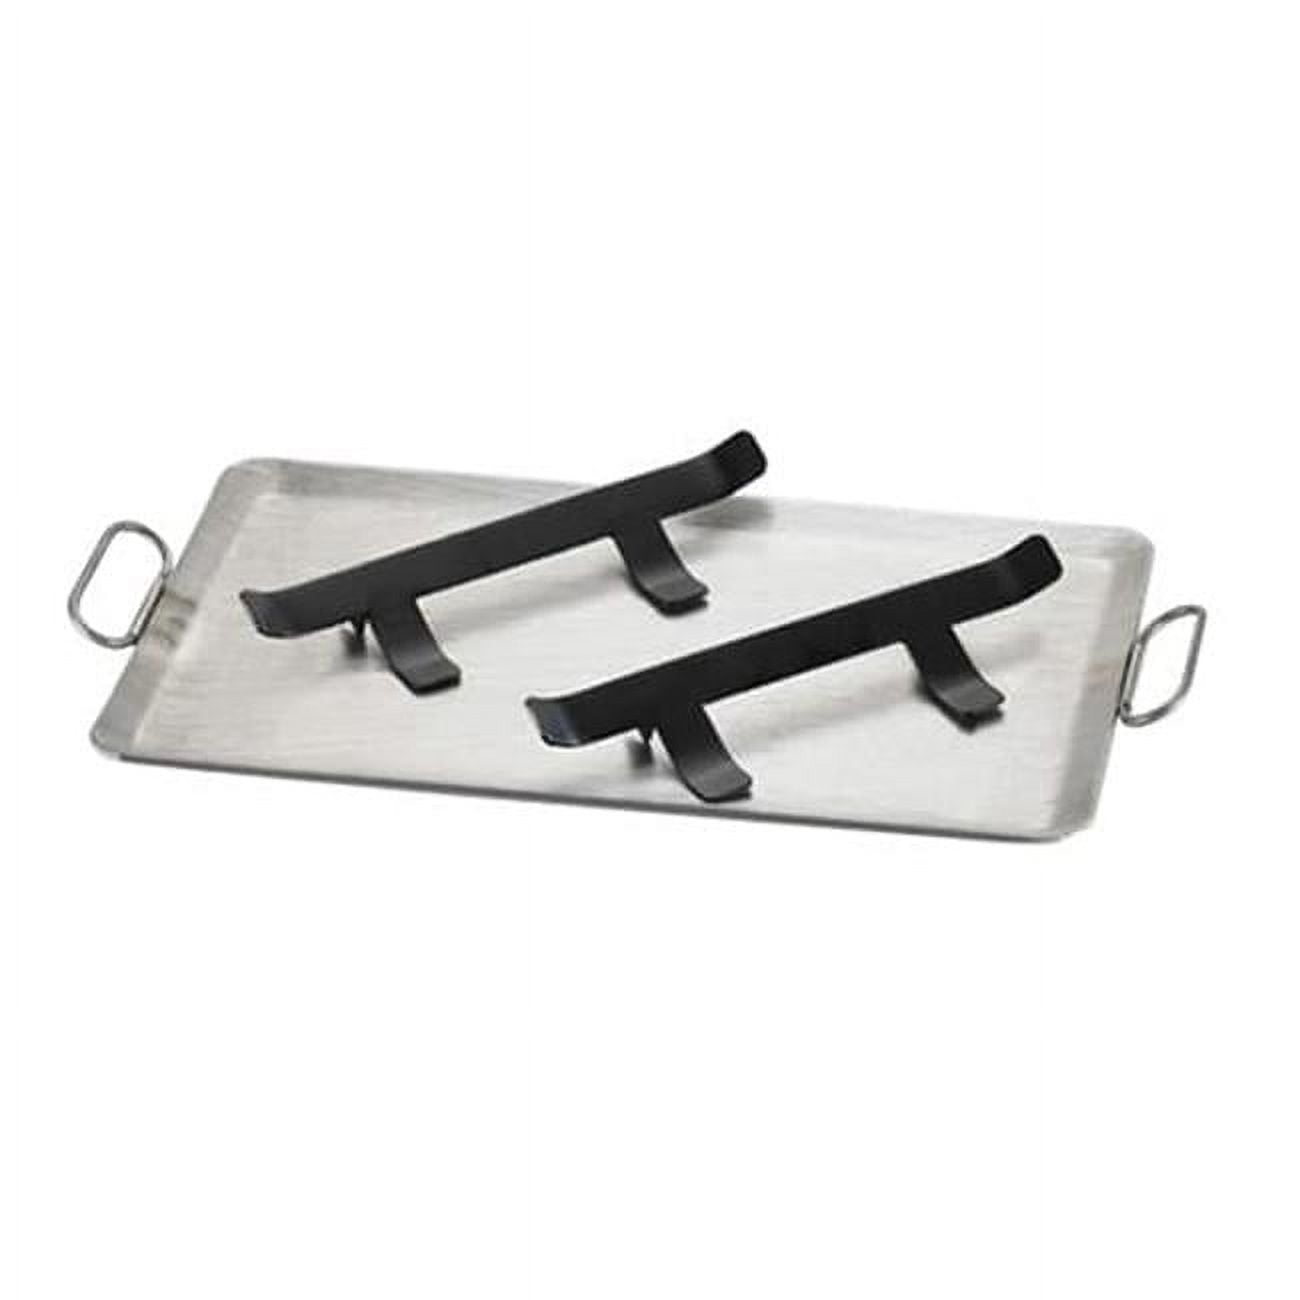 1362 Cook-n-serve Griddle Plate With Brackets - 22.75 X 13.75 X 2.25 In.